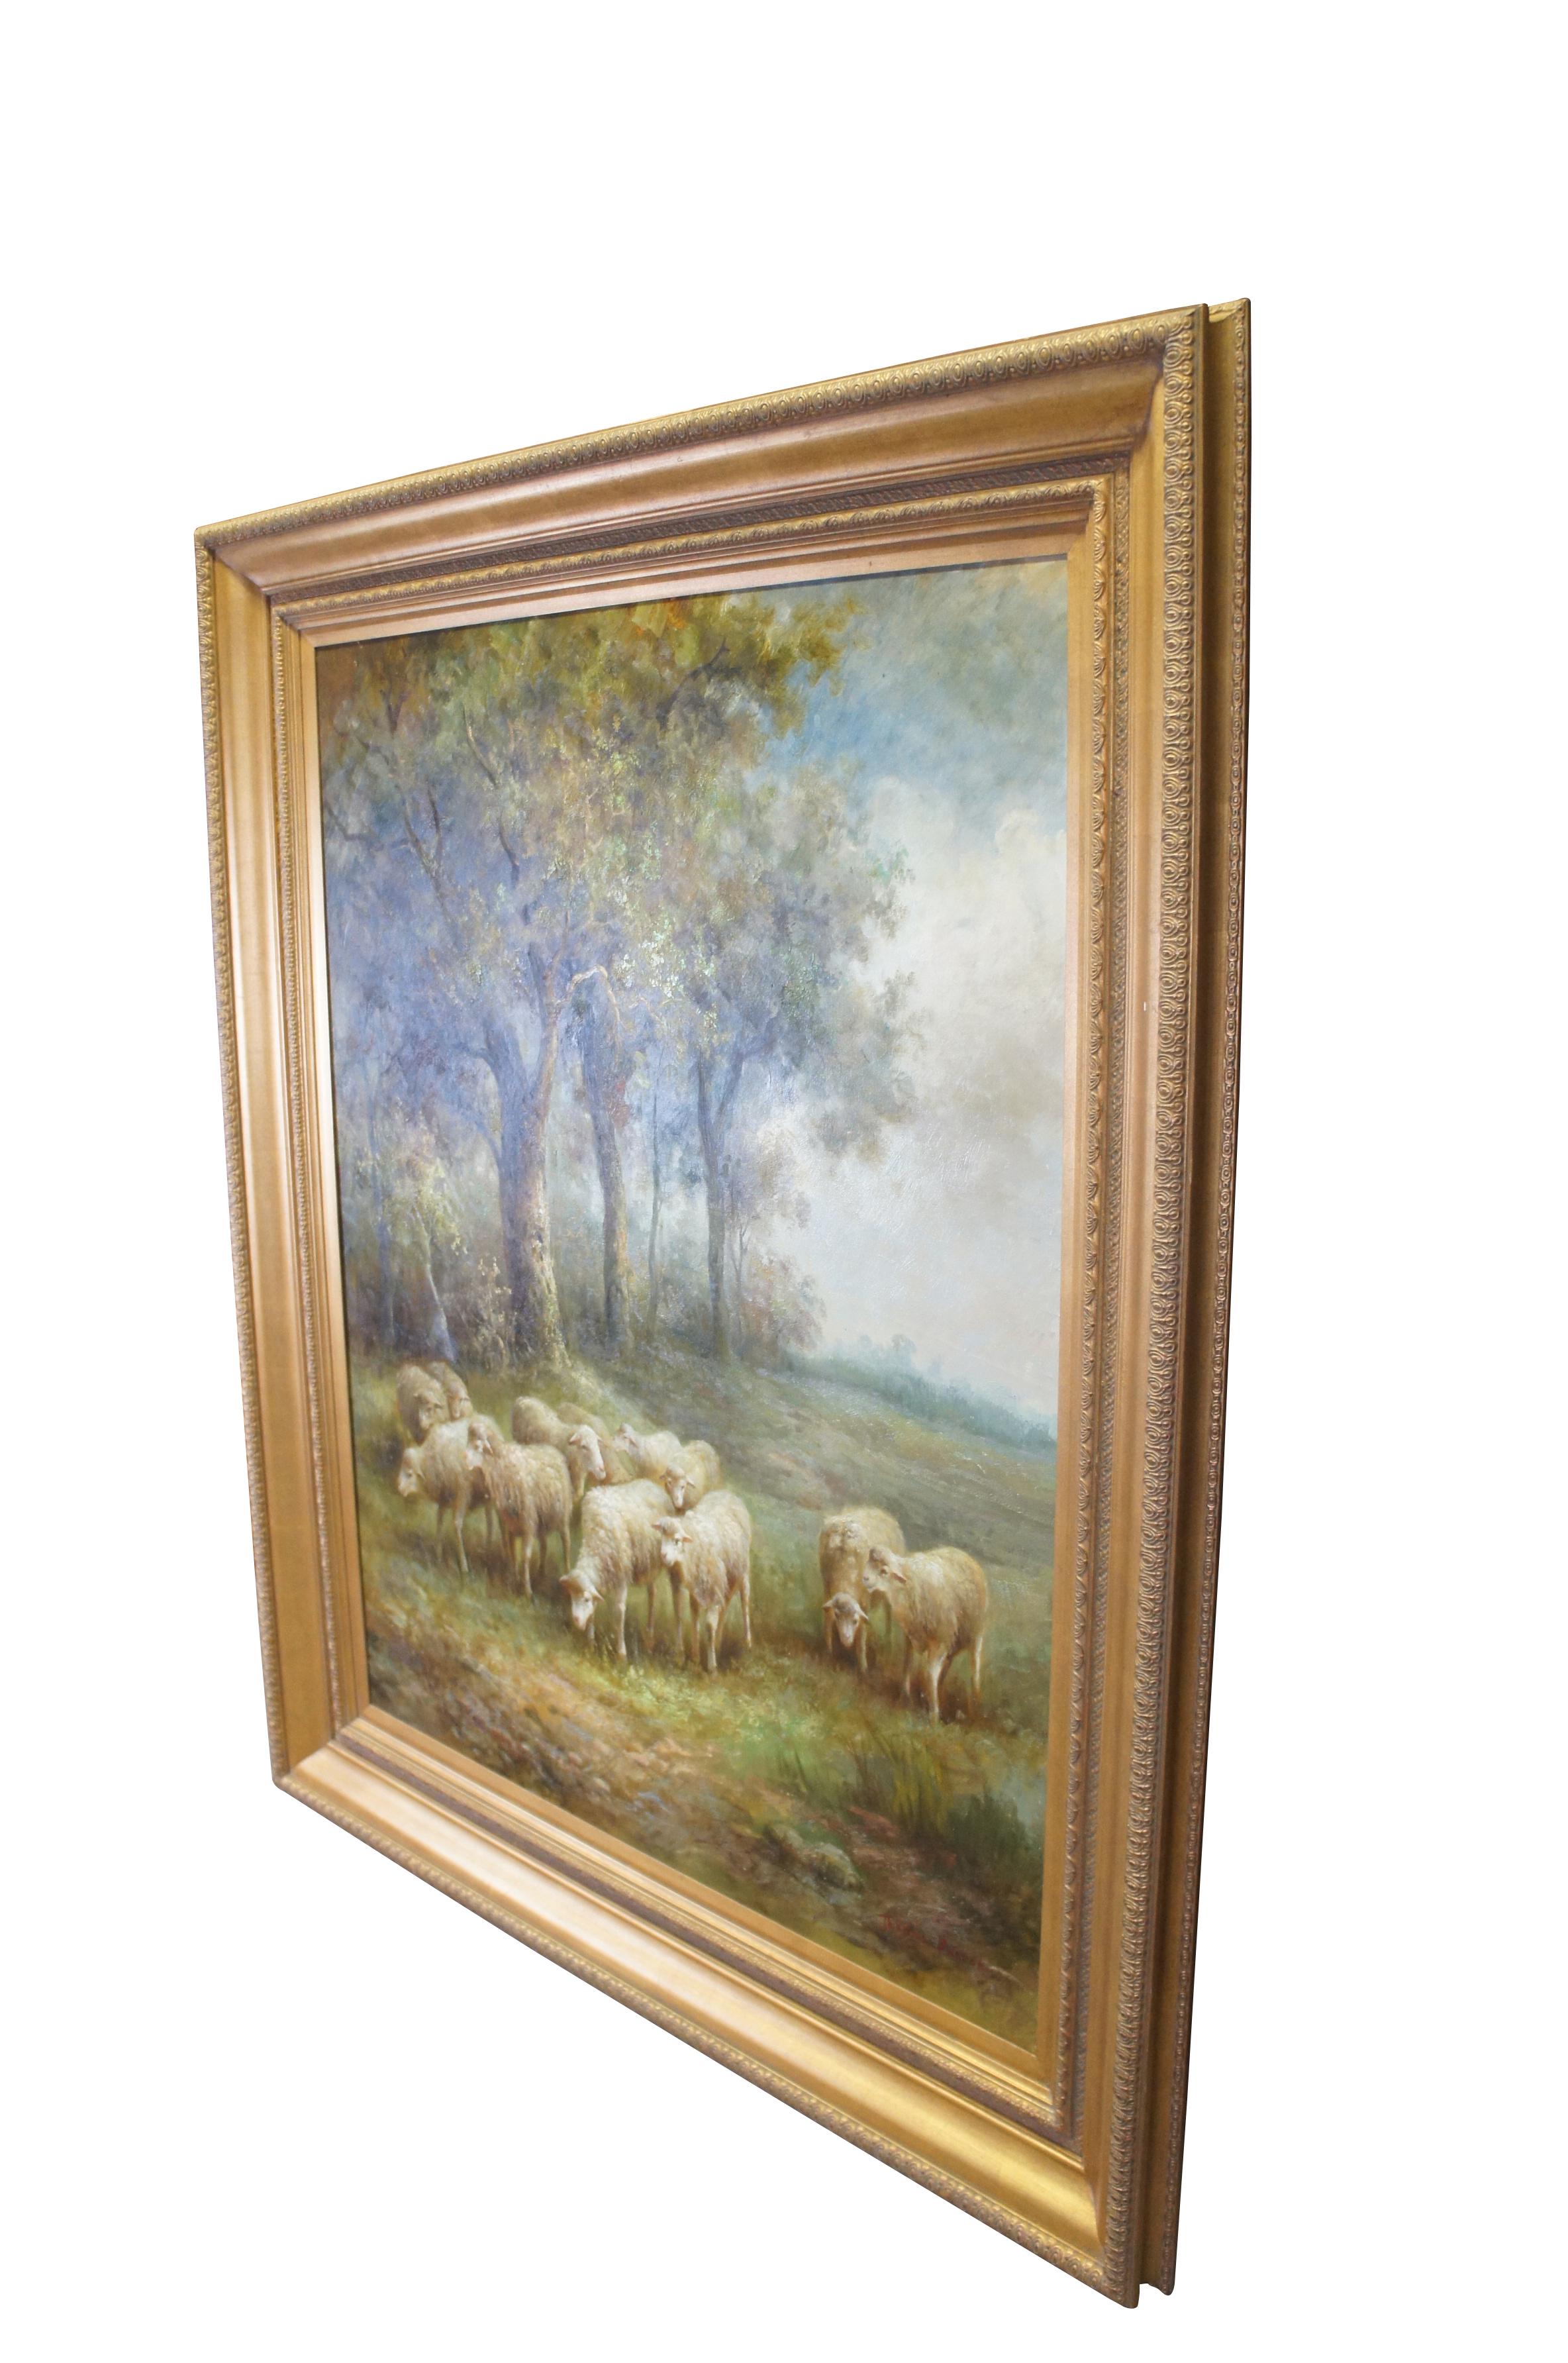 A very large and impressive vintage Thomas Barron oil painting on canvas featuring a flock of sheep / lamb grazing at the edge of a forest in the countryside.  Framed in elegant gold frame.

Dimensions:
74.5